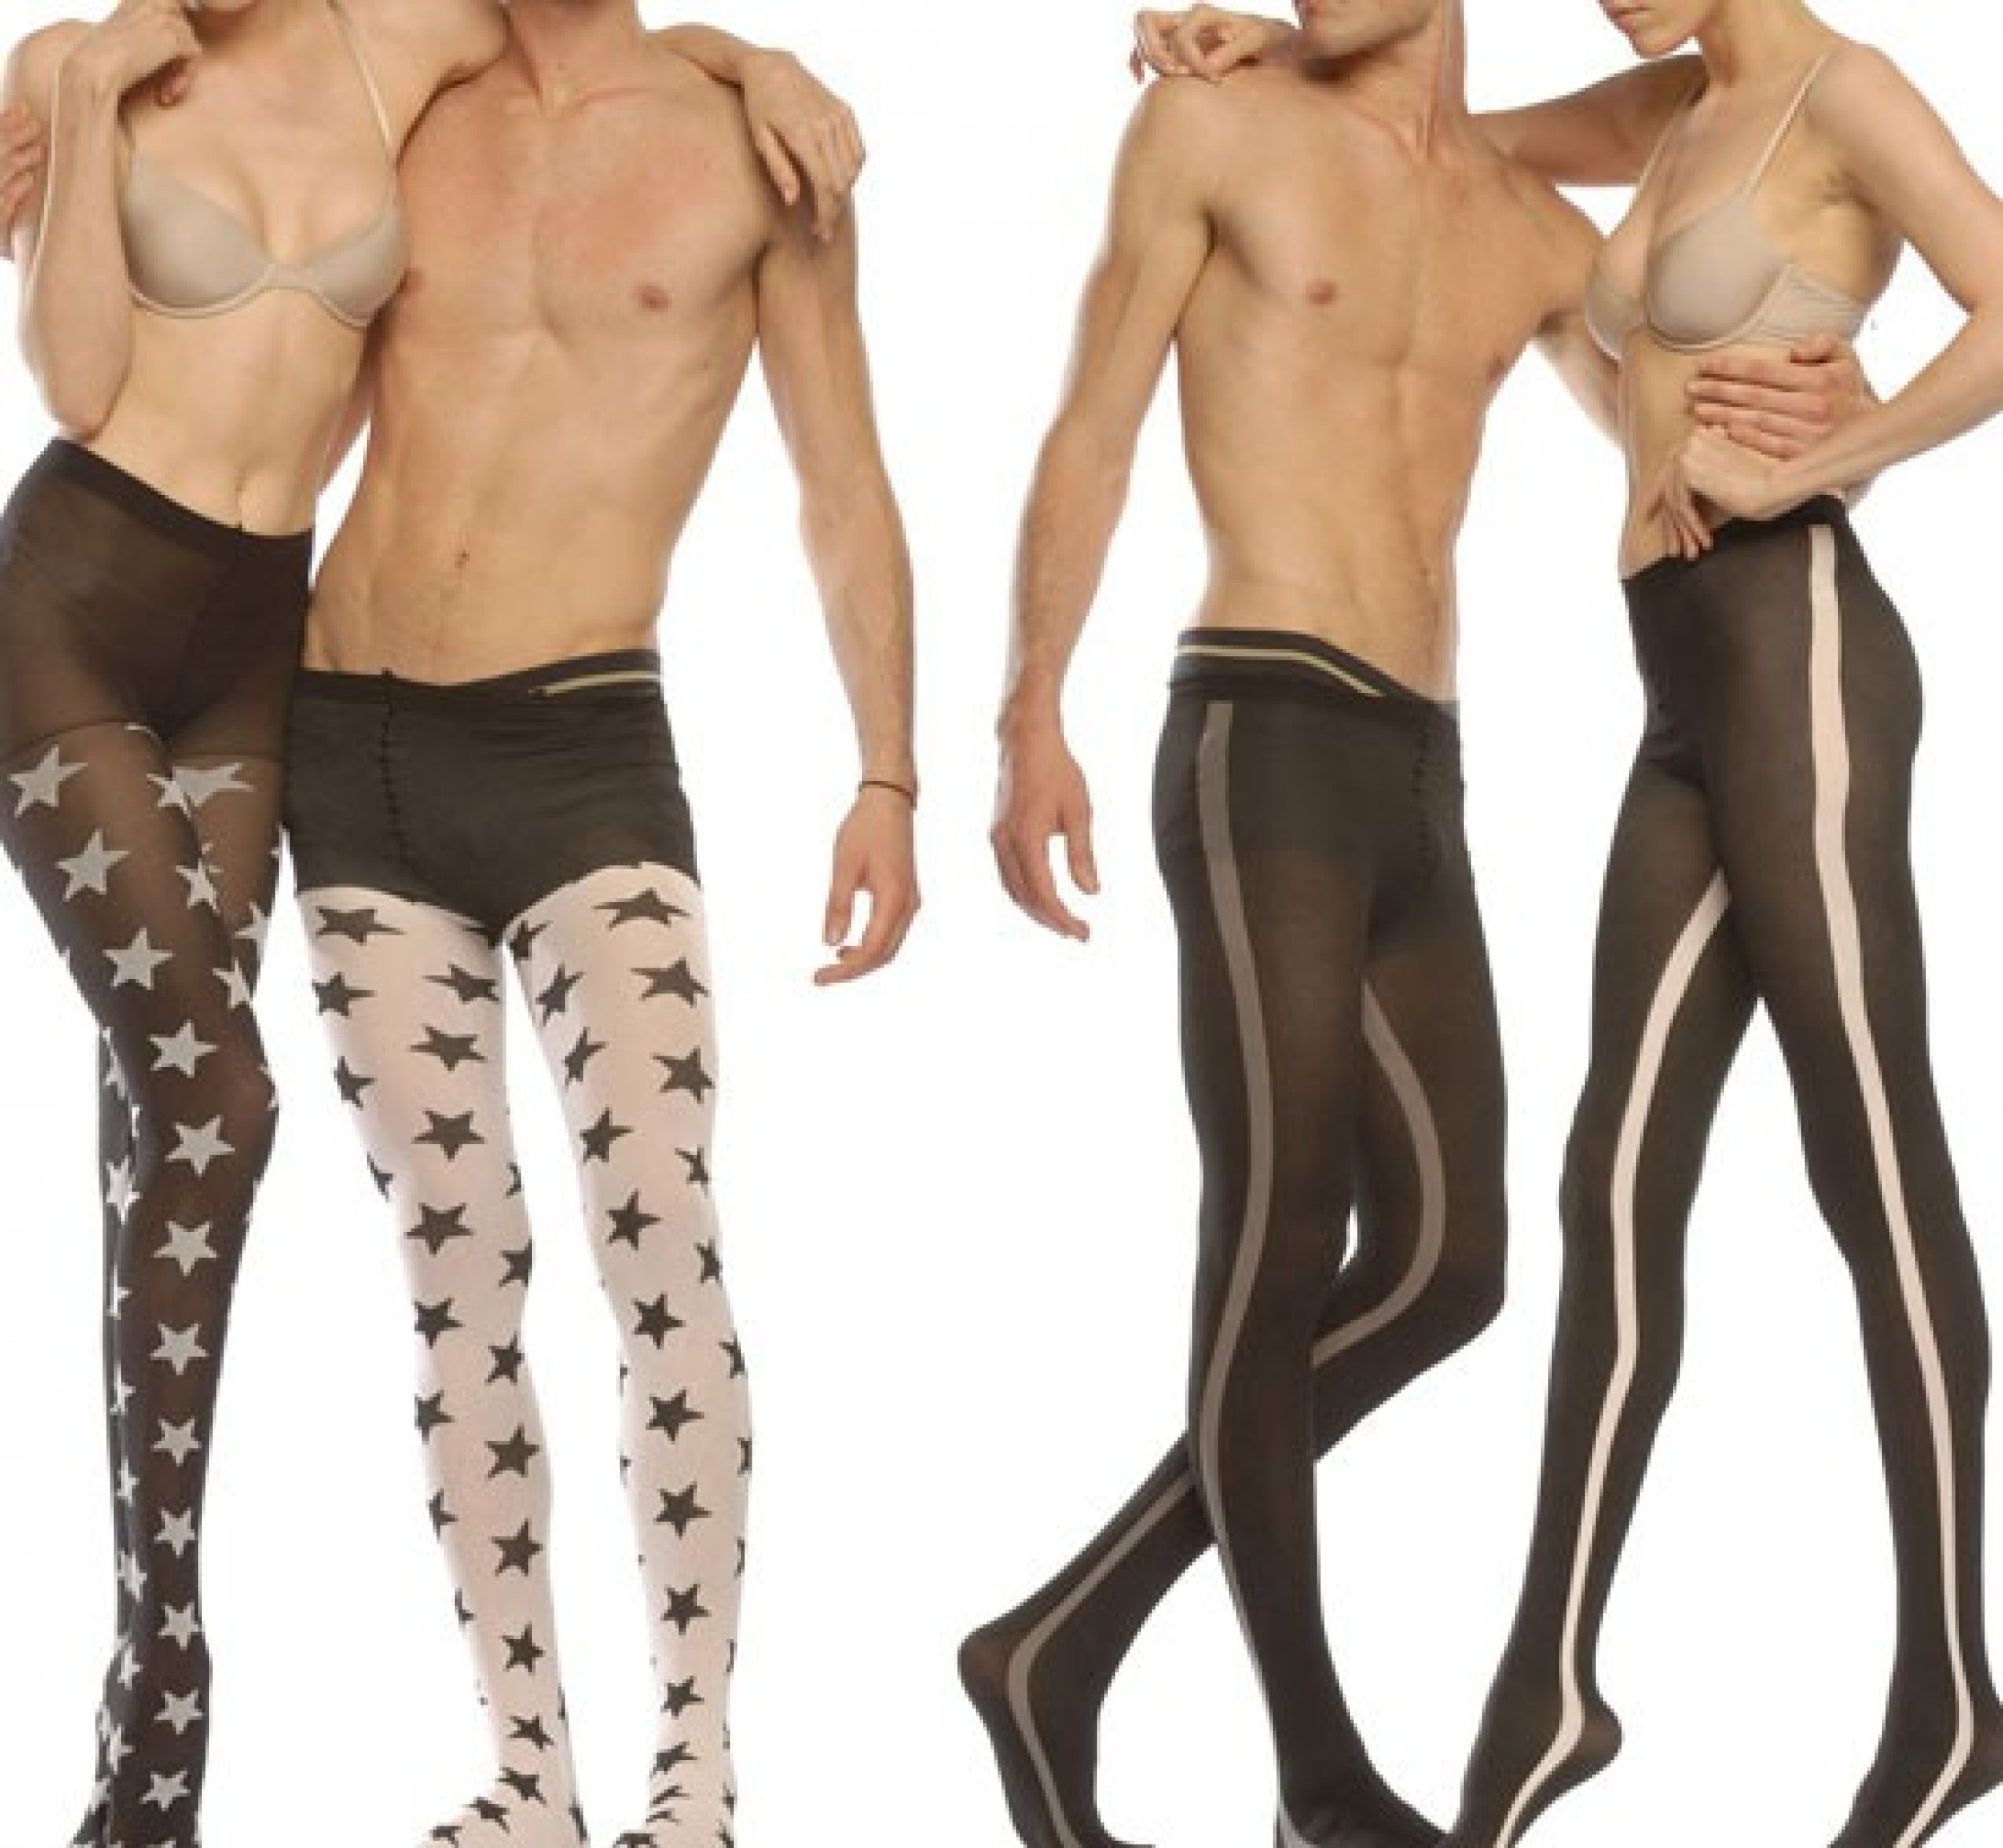 Hosiery For Men: Tights for men launched at My Tights